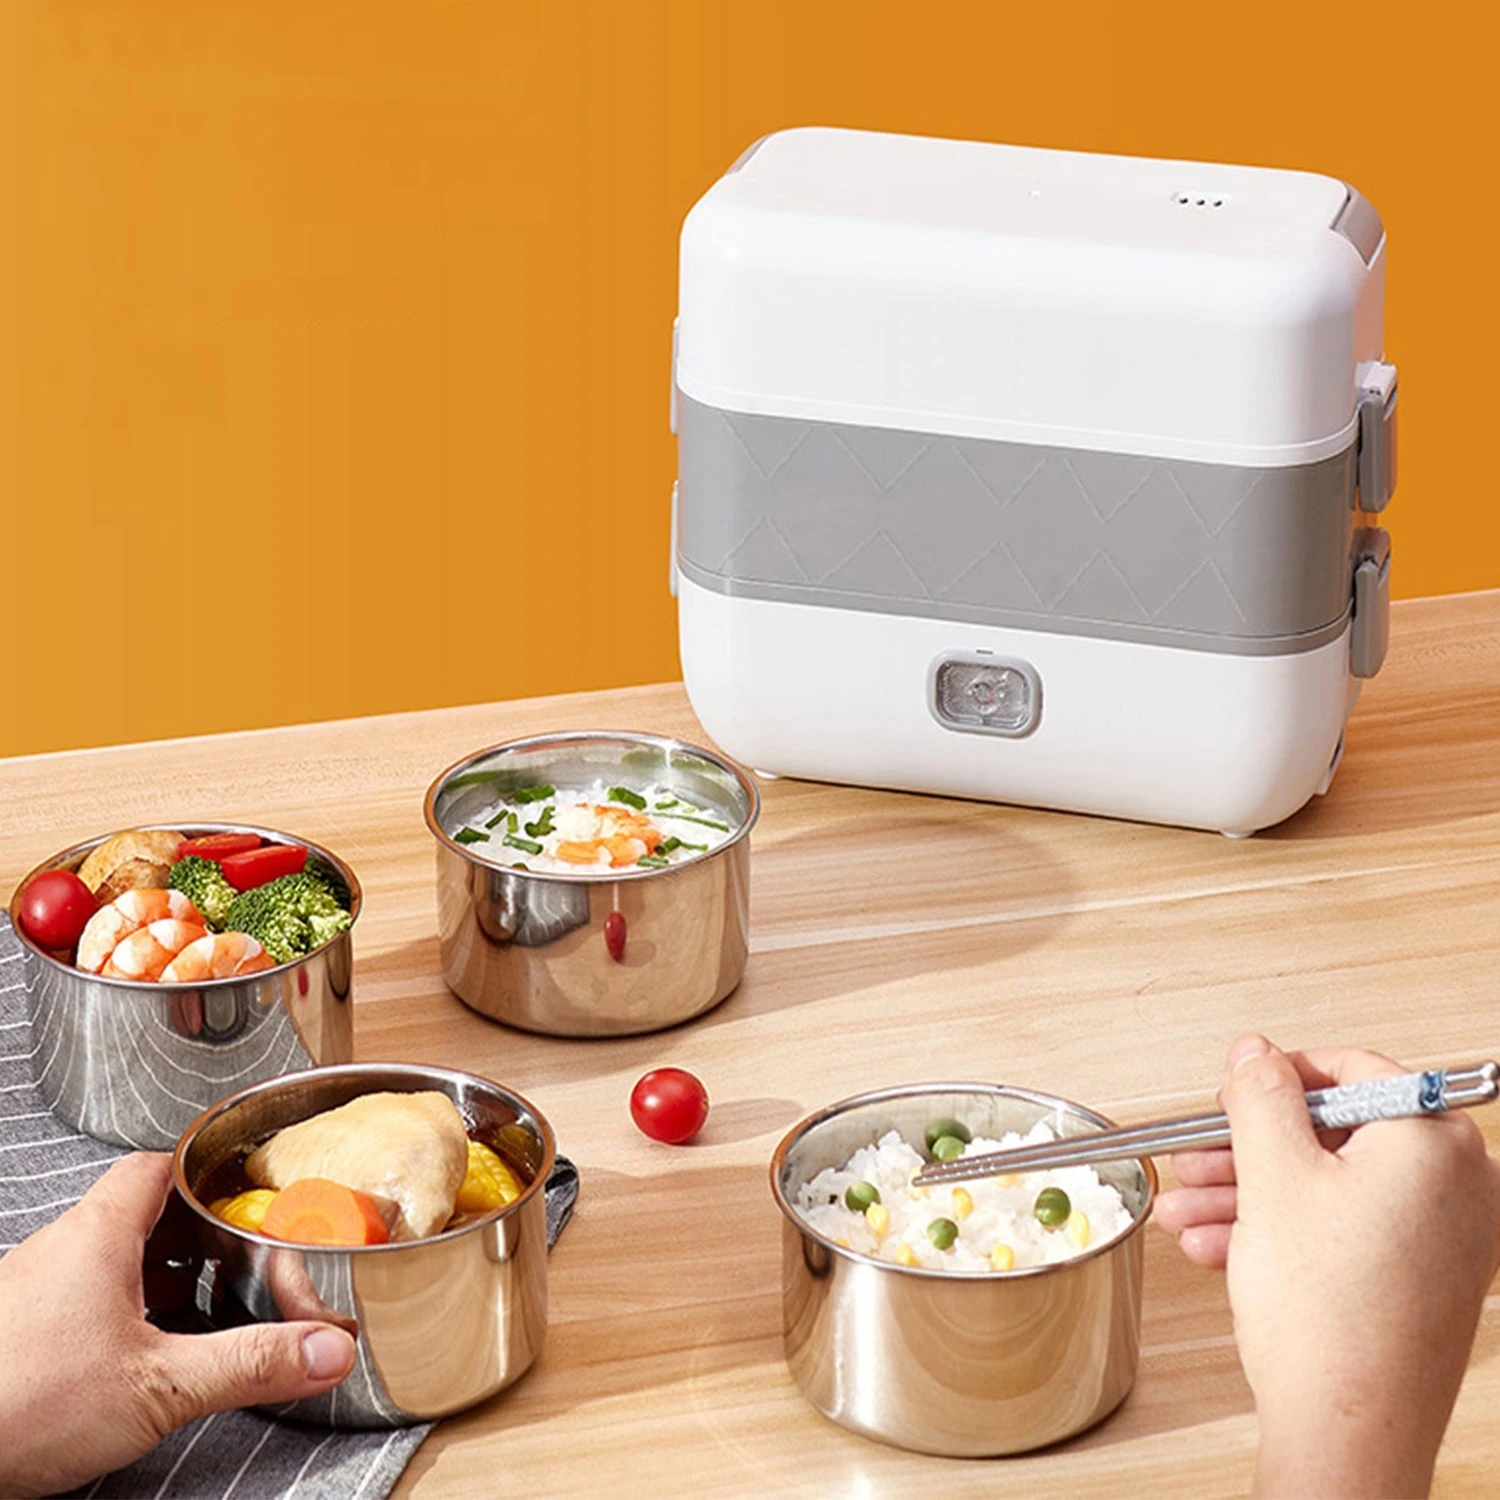 300W Electric Lunch Box Food Heater Container Portable Stainless Steel  Warmer